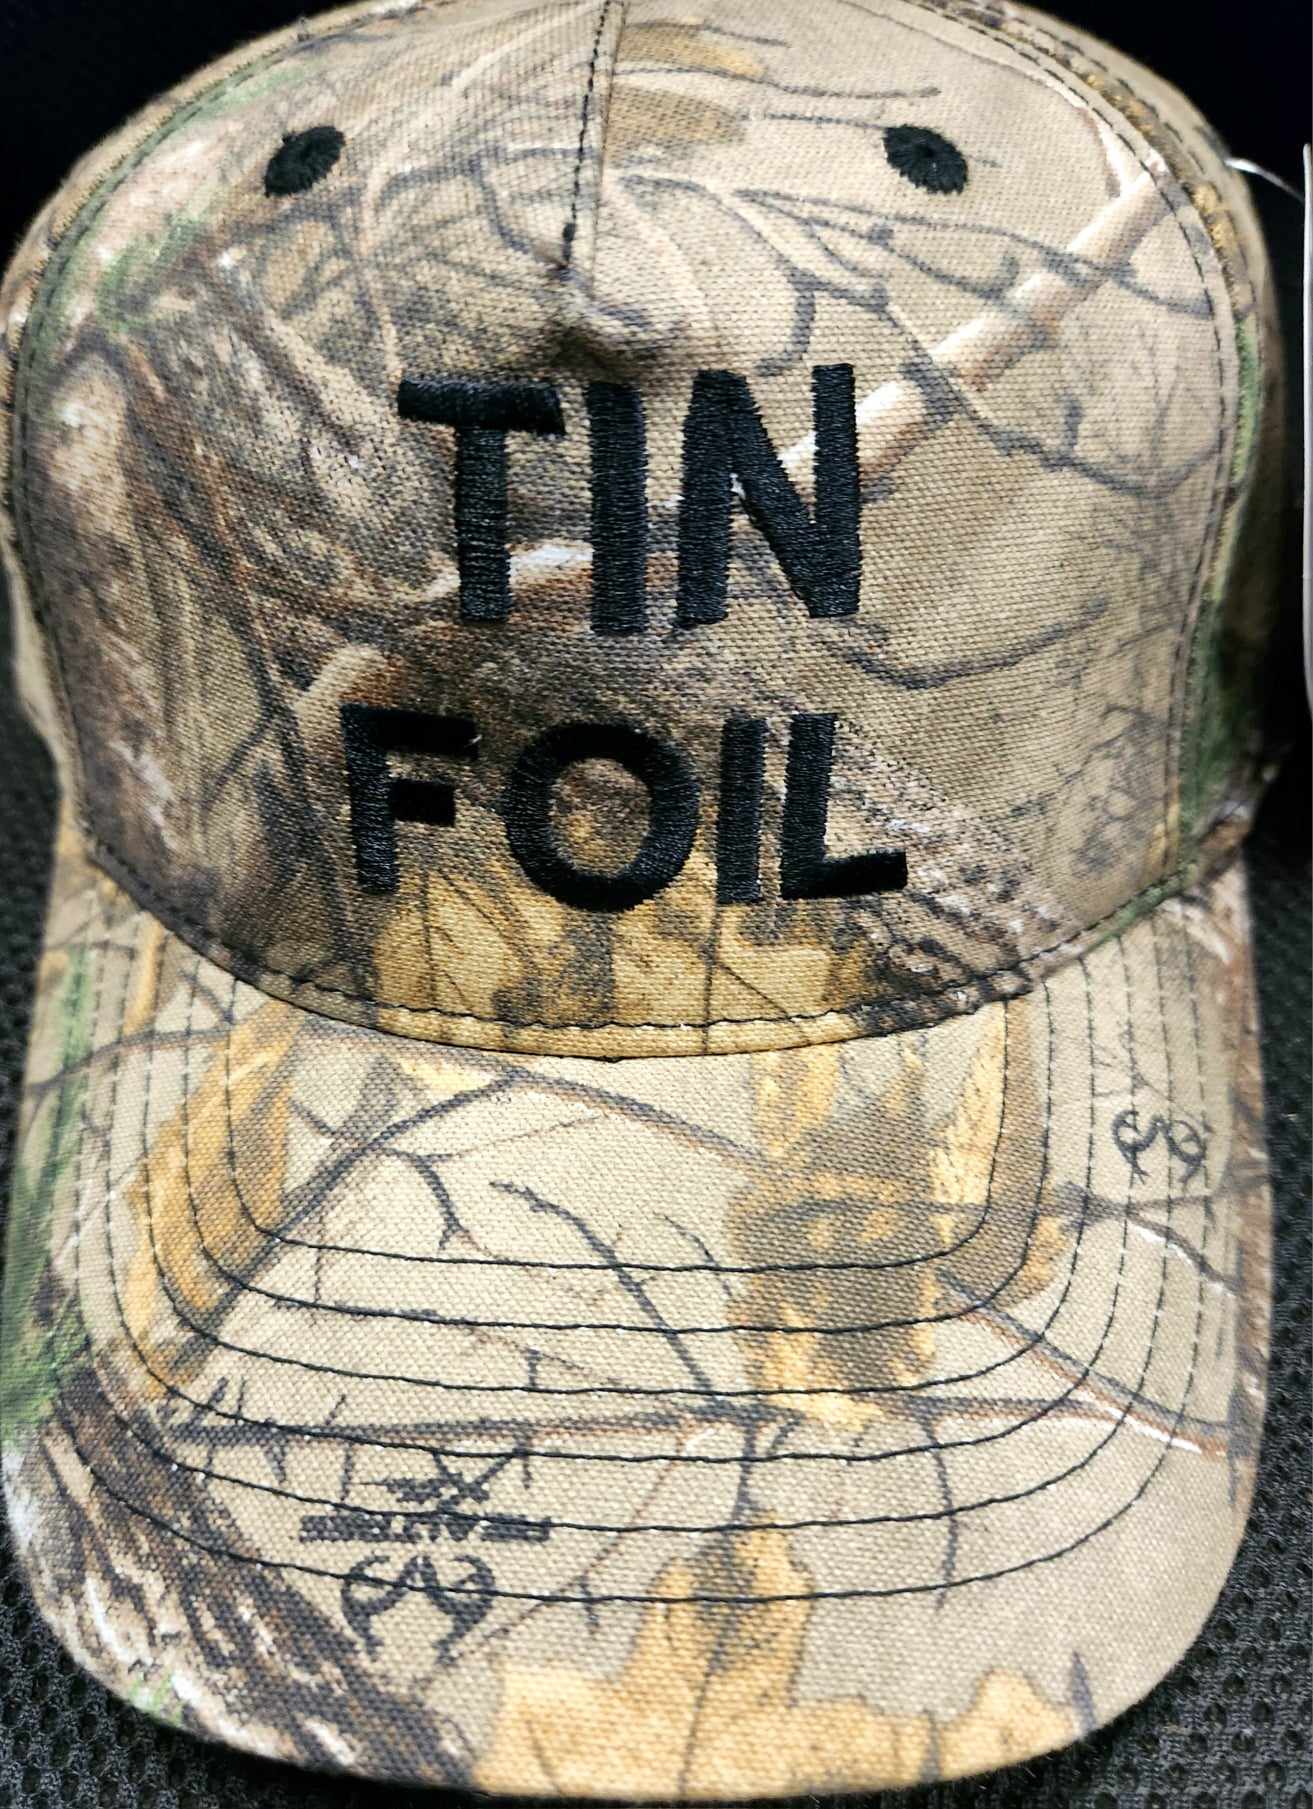 Hats with Tin Foil Letter Embroidery (Custom Order)